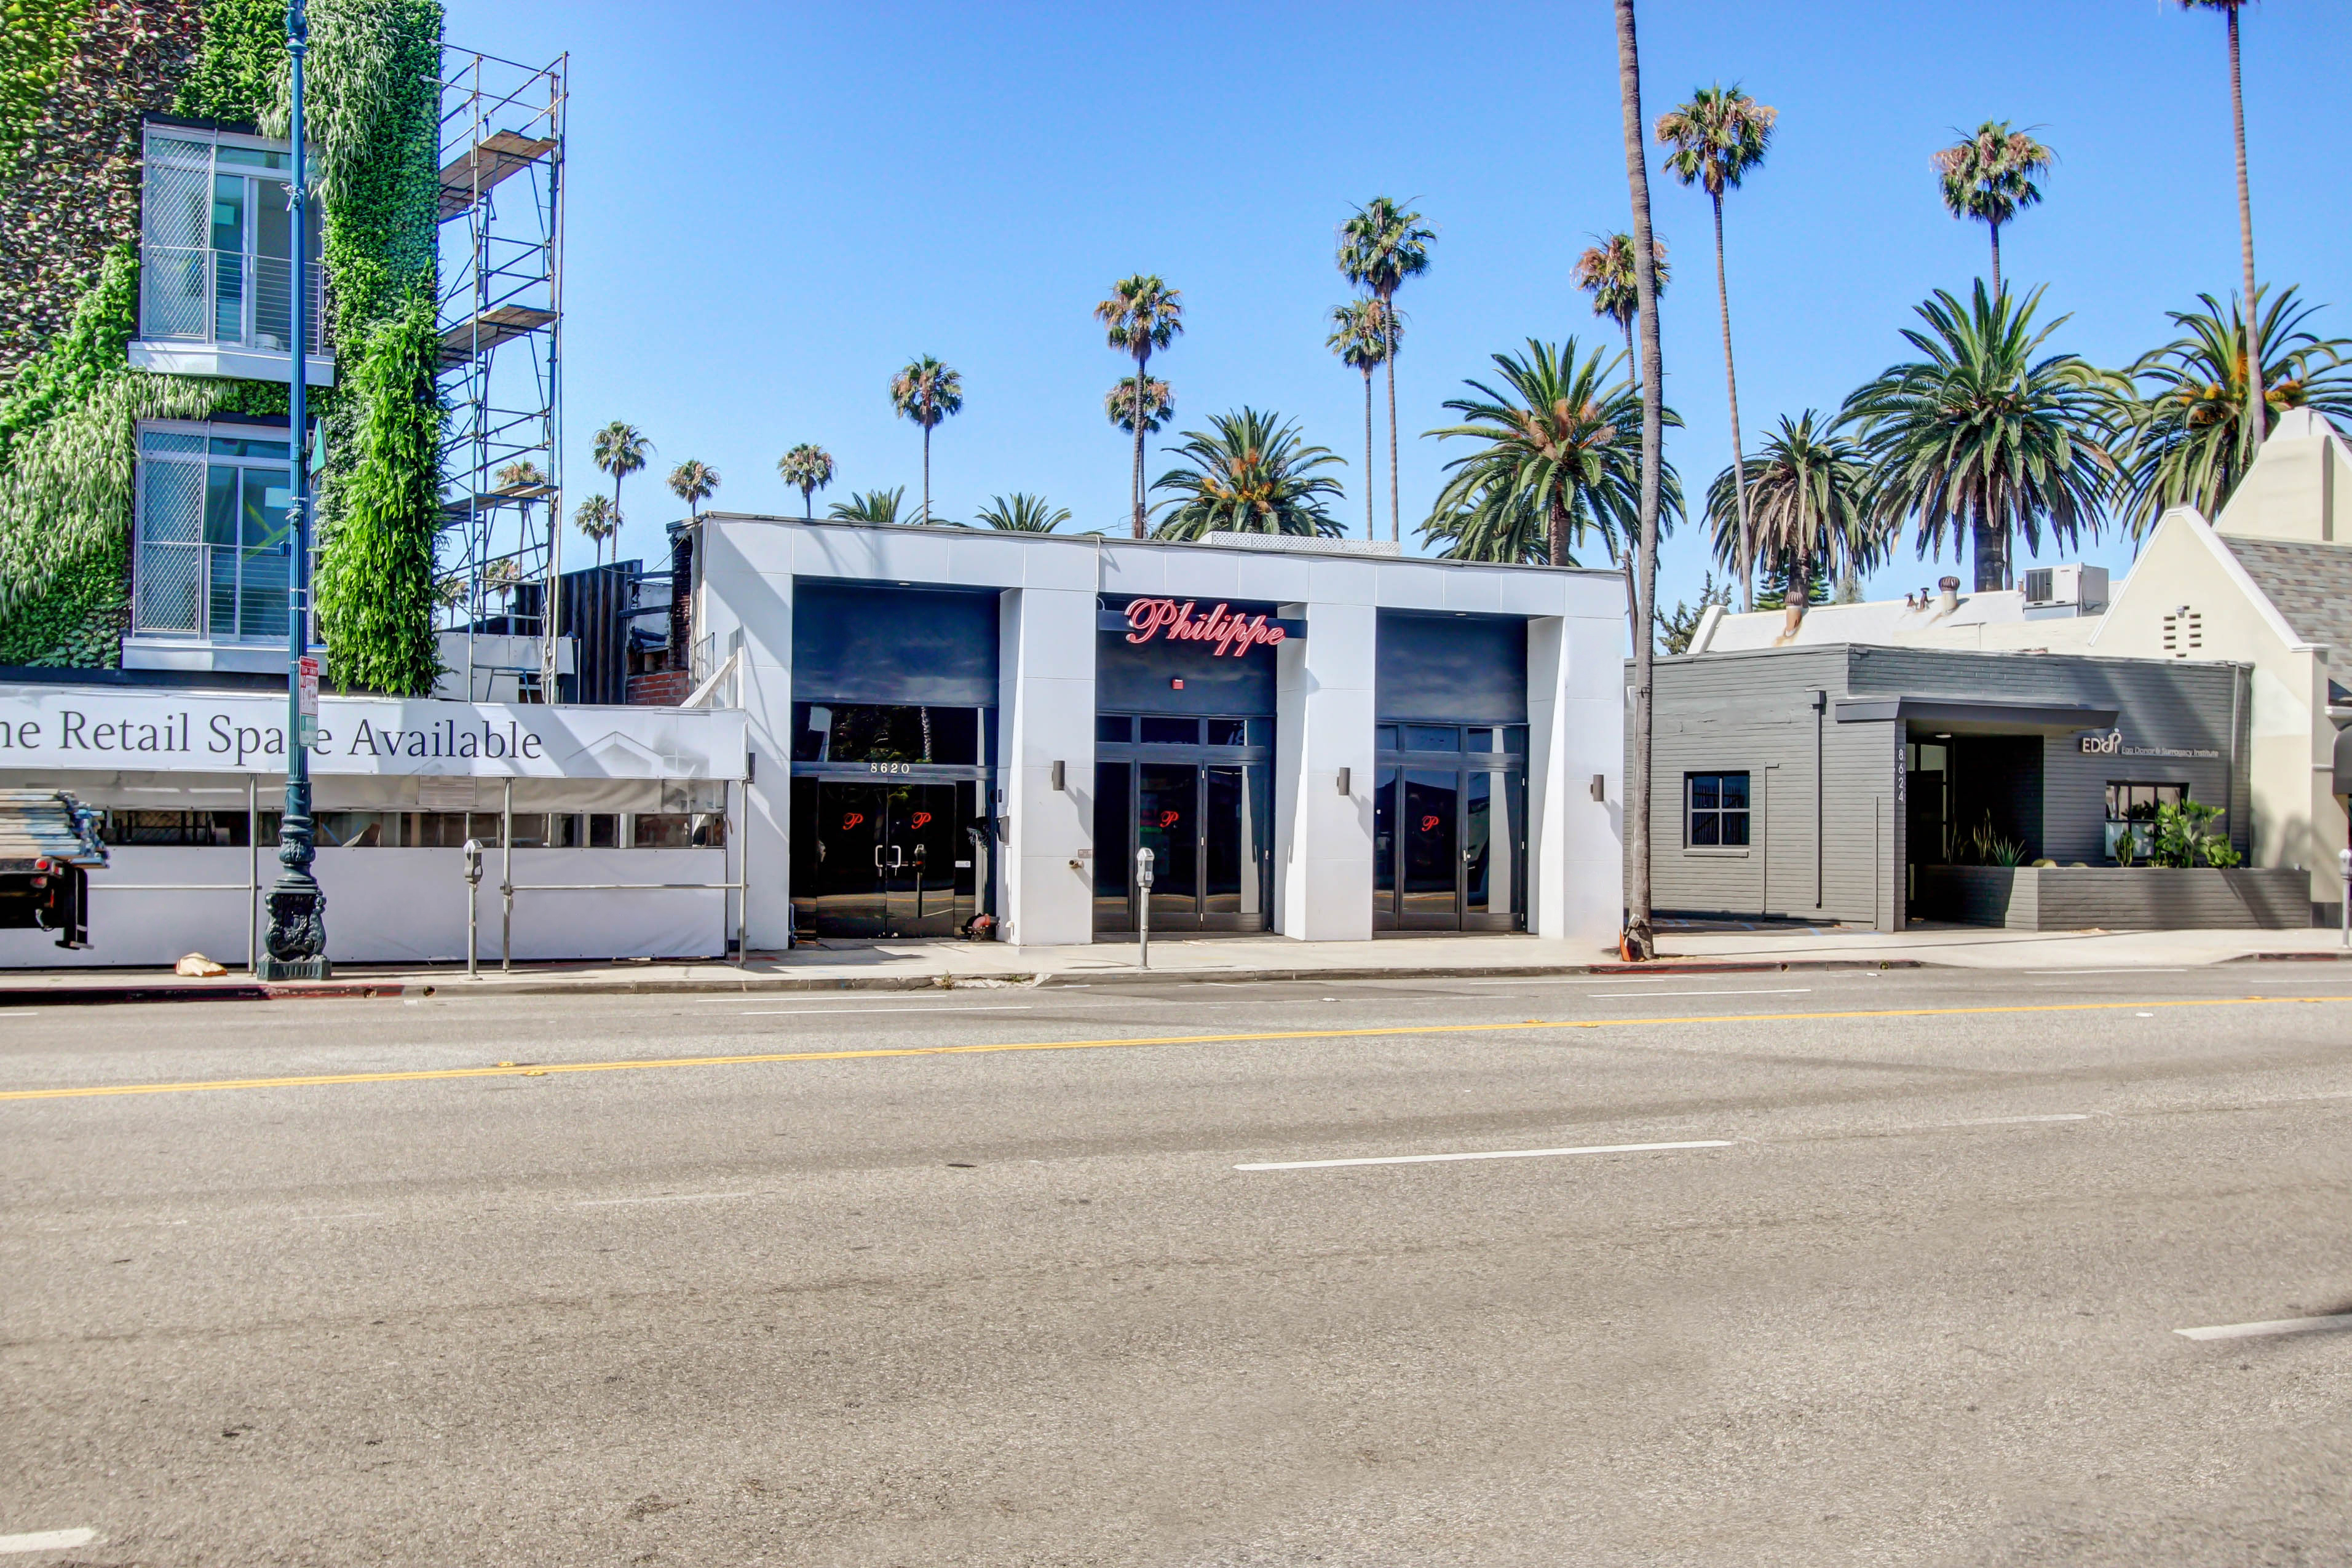 WESTMAC COMMERCIAL BROKERAGE COMPANY ARRANGES $2.975 MILLION SALE OF WILSHIRE BOULEVARD COMMERCIAL BUILDING IN BEVERLY HILLS, CA